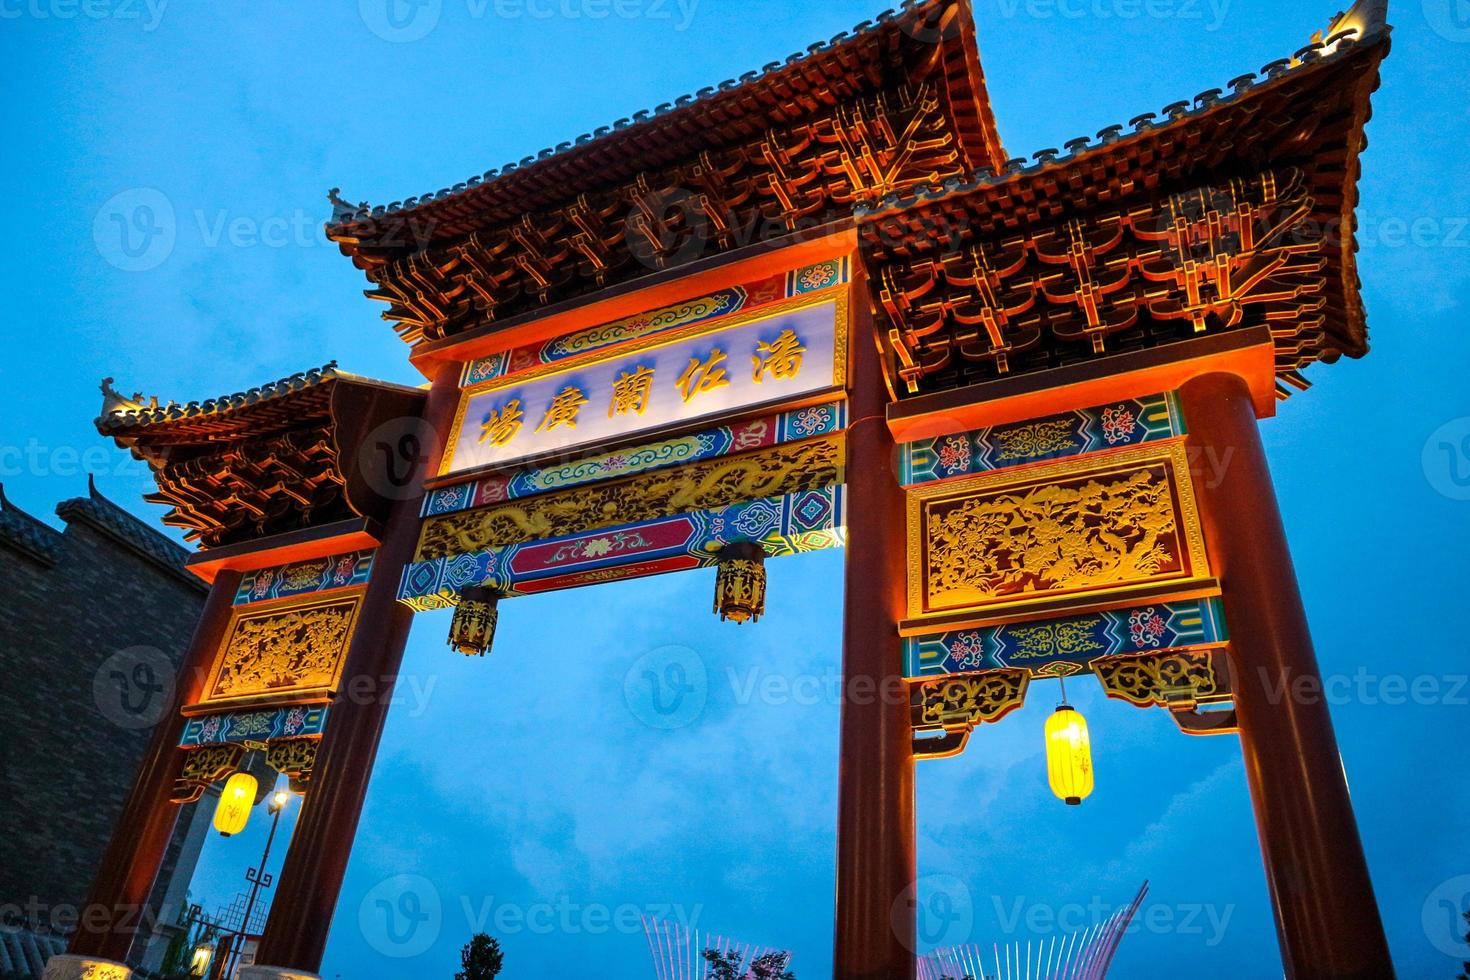 The entrance gate of Pantjoran PIK Chinatown with blue sky background. photo